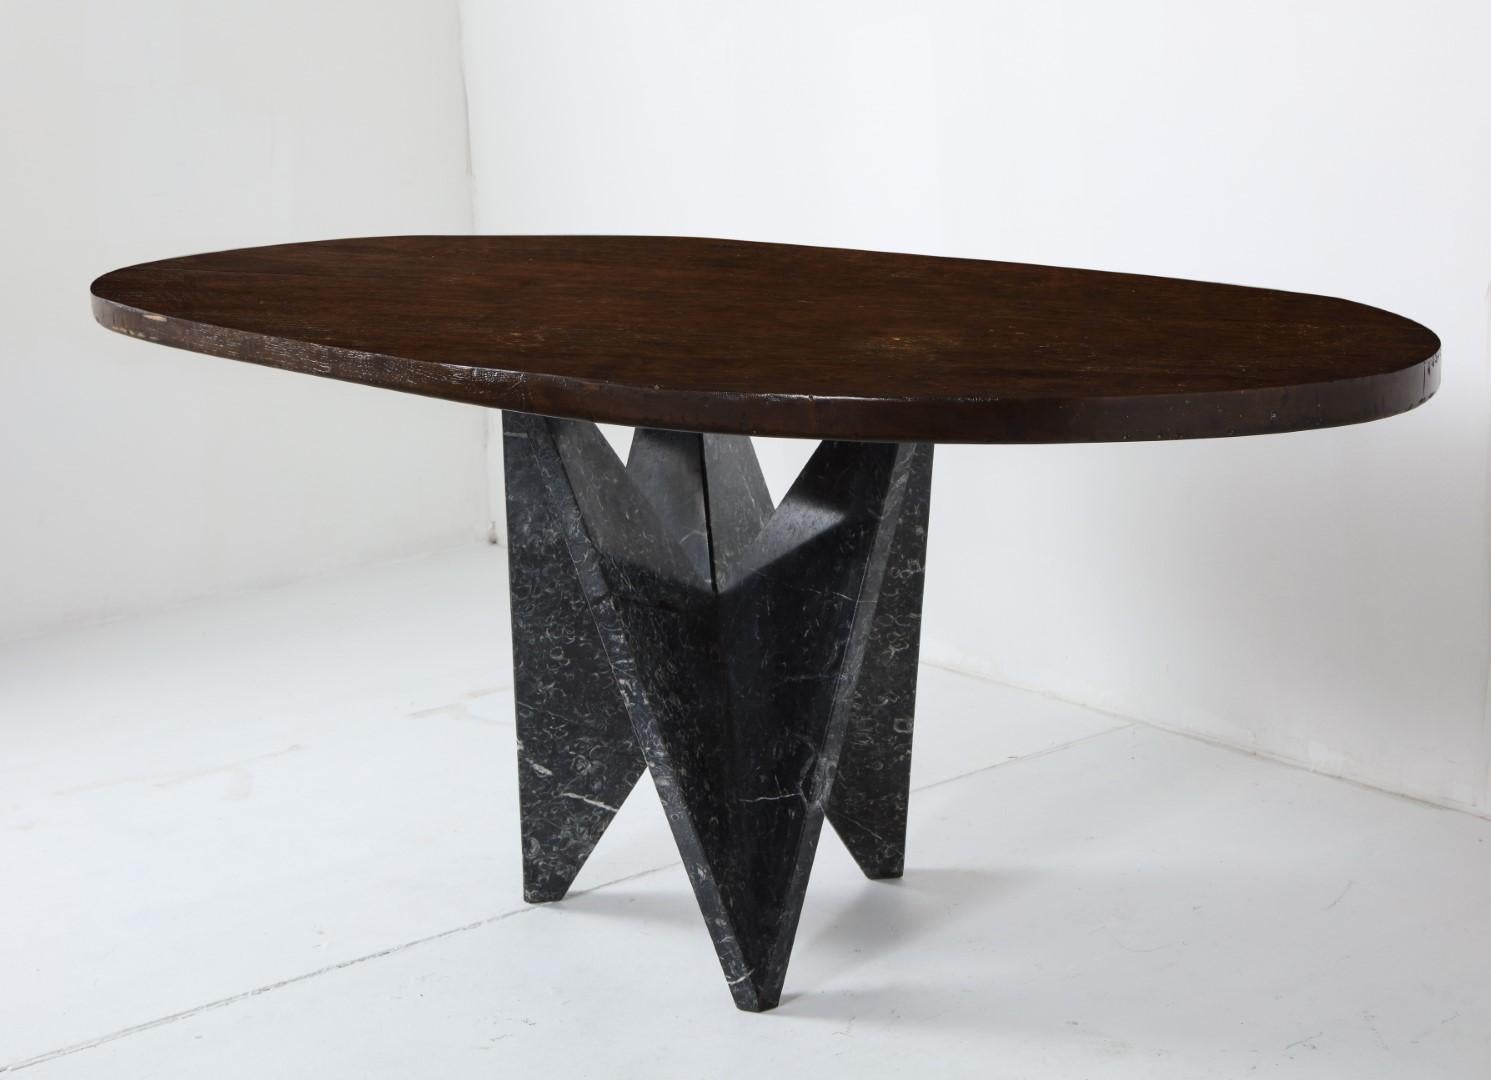 Dining table with 1980s Italian sculptural black marble base. 

Elliptical oval walnut top custom made by Dos Gallos (Los Angeles) in 2019. 

Table top is approx 1 5/8